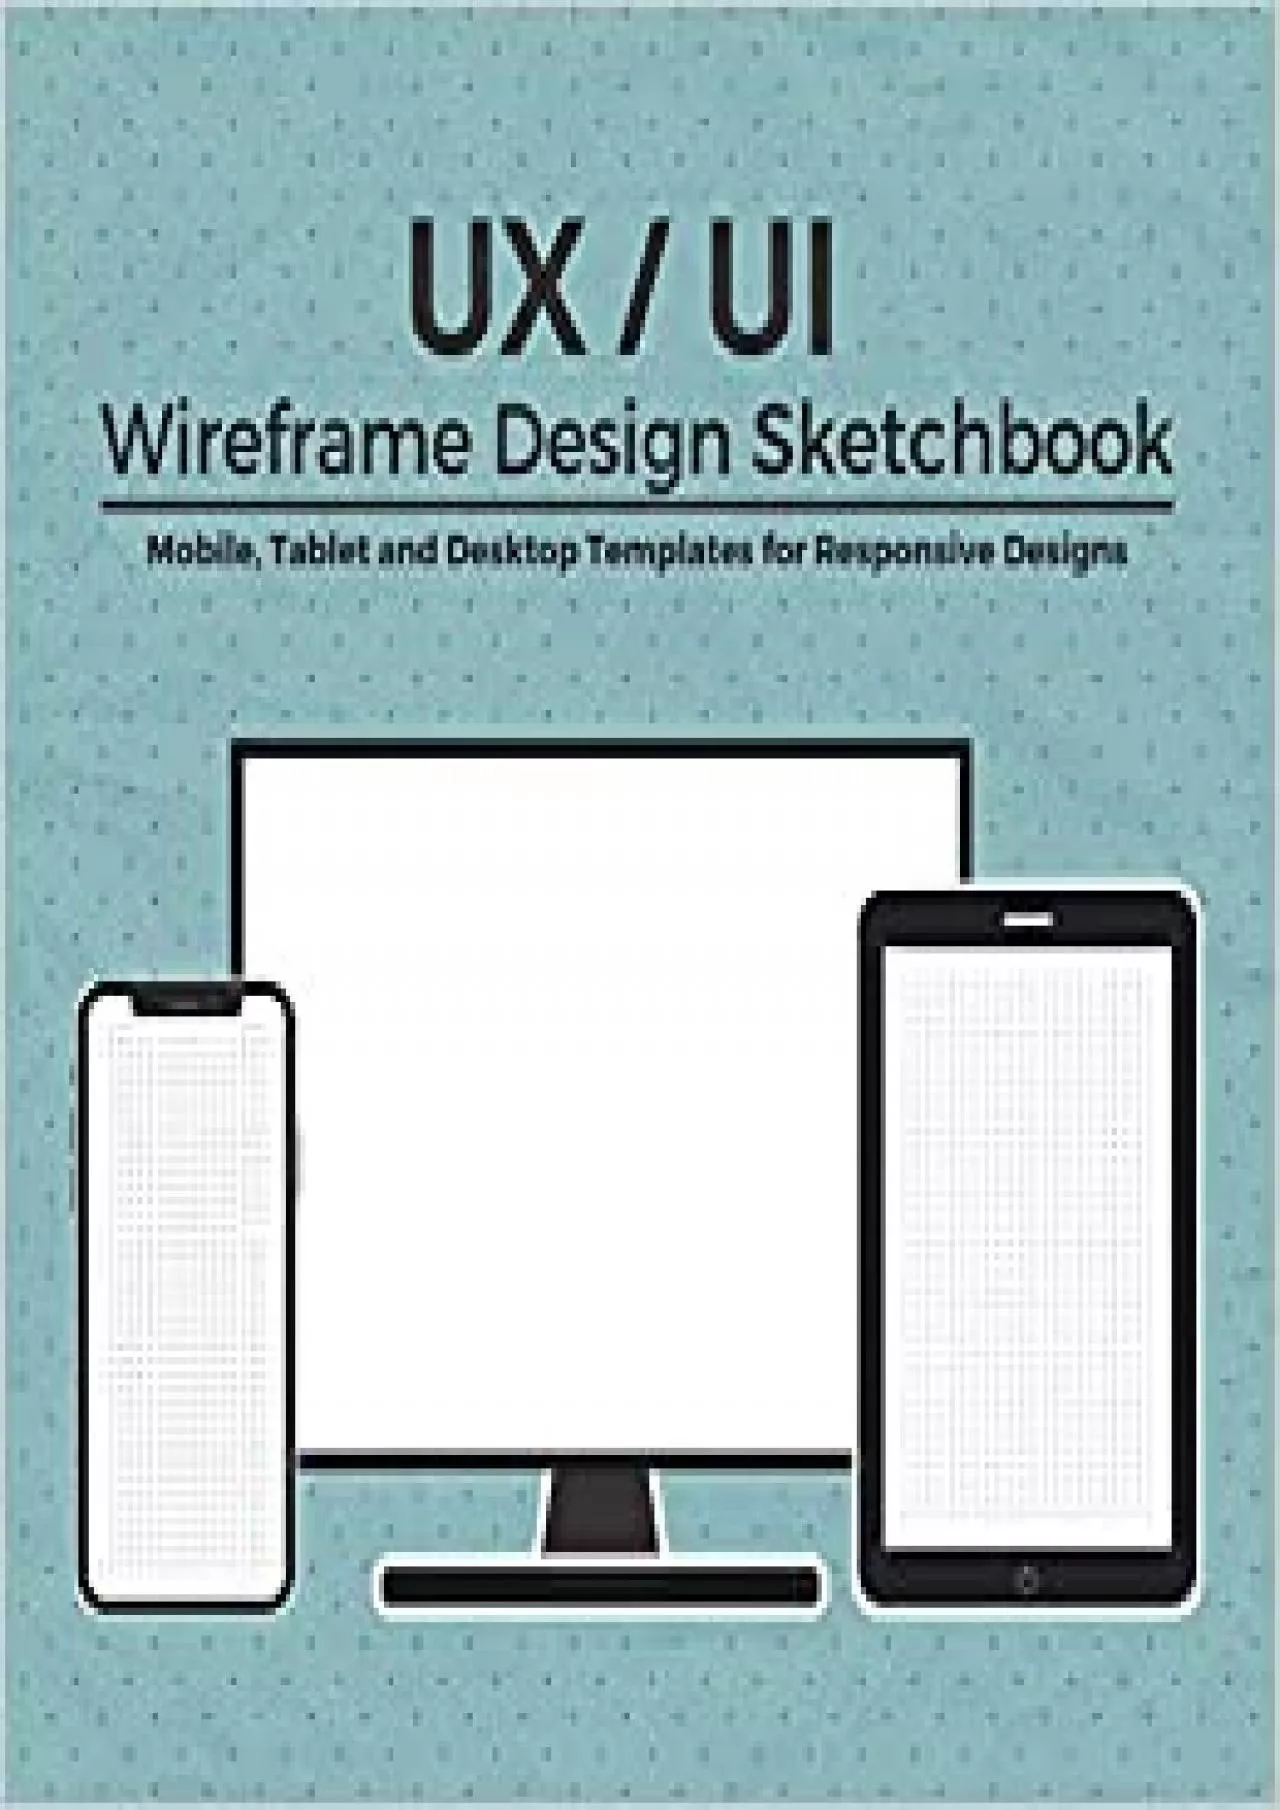 (BOOK)-UX / UI Wireframe Design Sketchbook Prototype your apps or web projects quickly